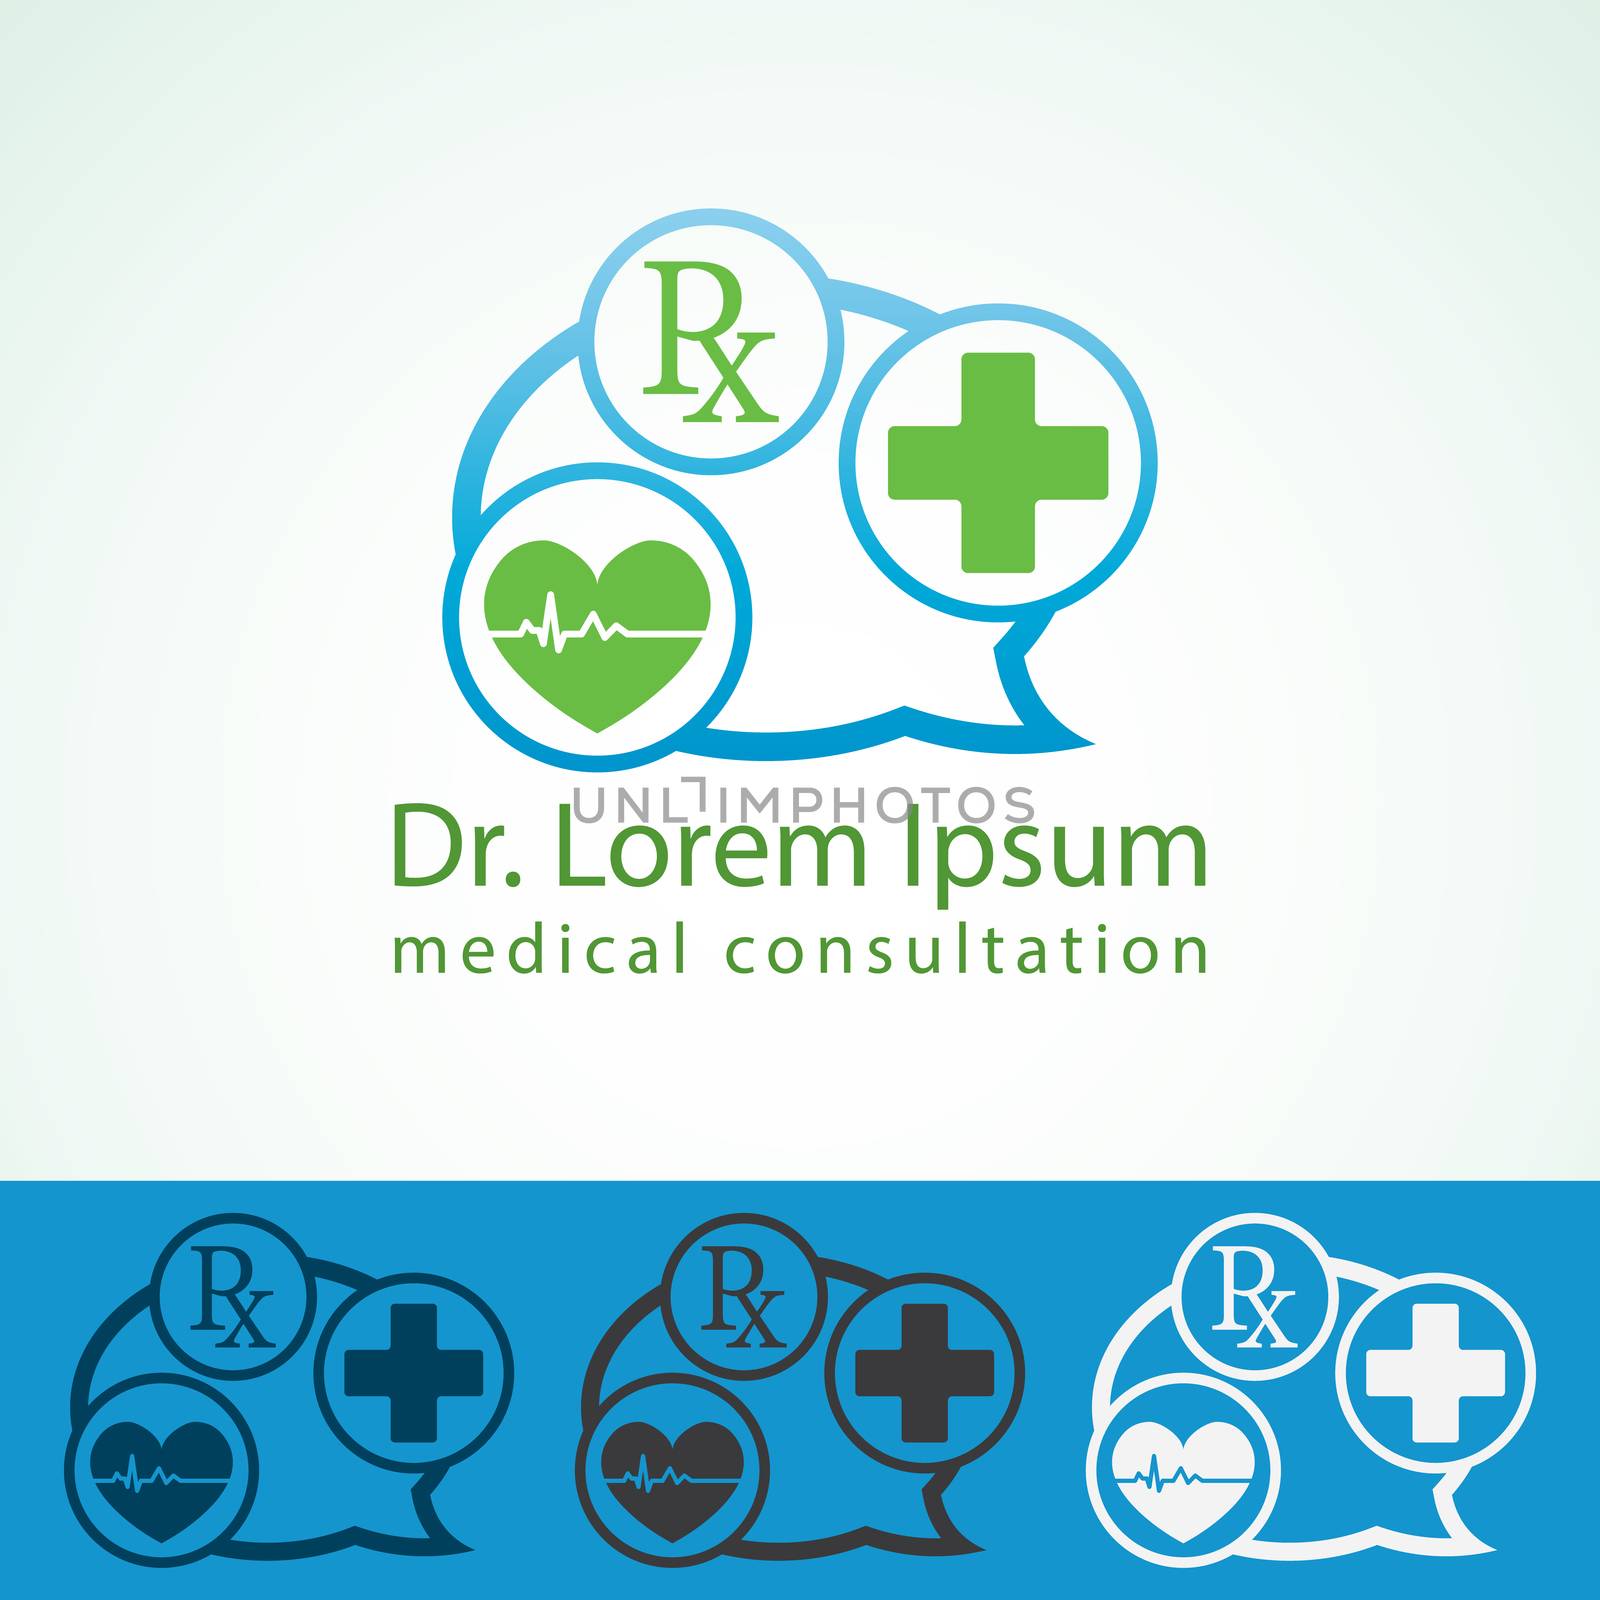 Medical pharmacy logo design template. Medic cross icon heart with cardiogram. Doctor consultant identity mock up.